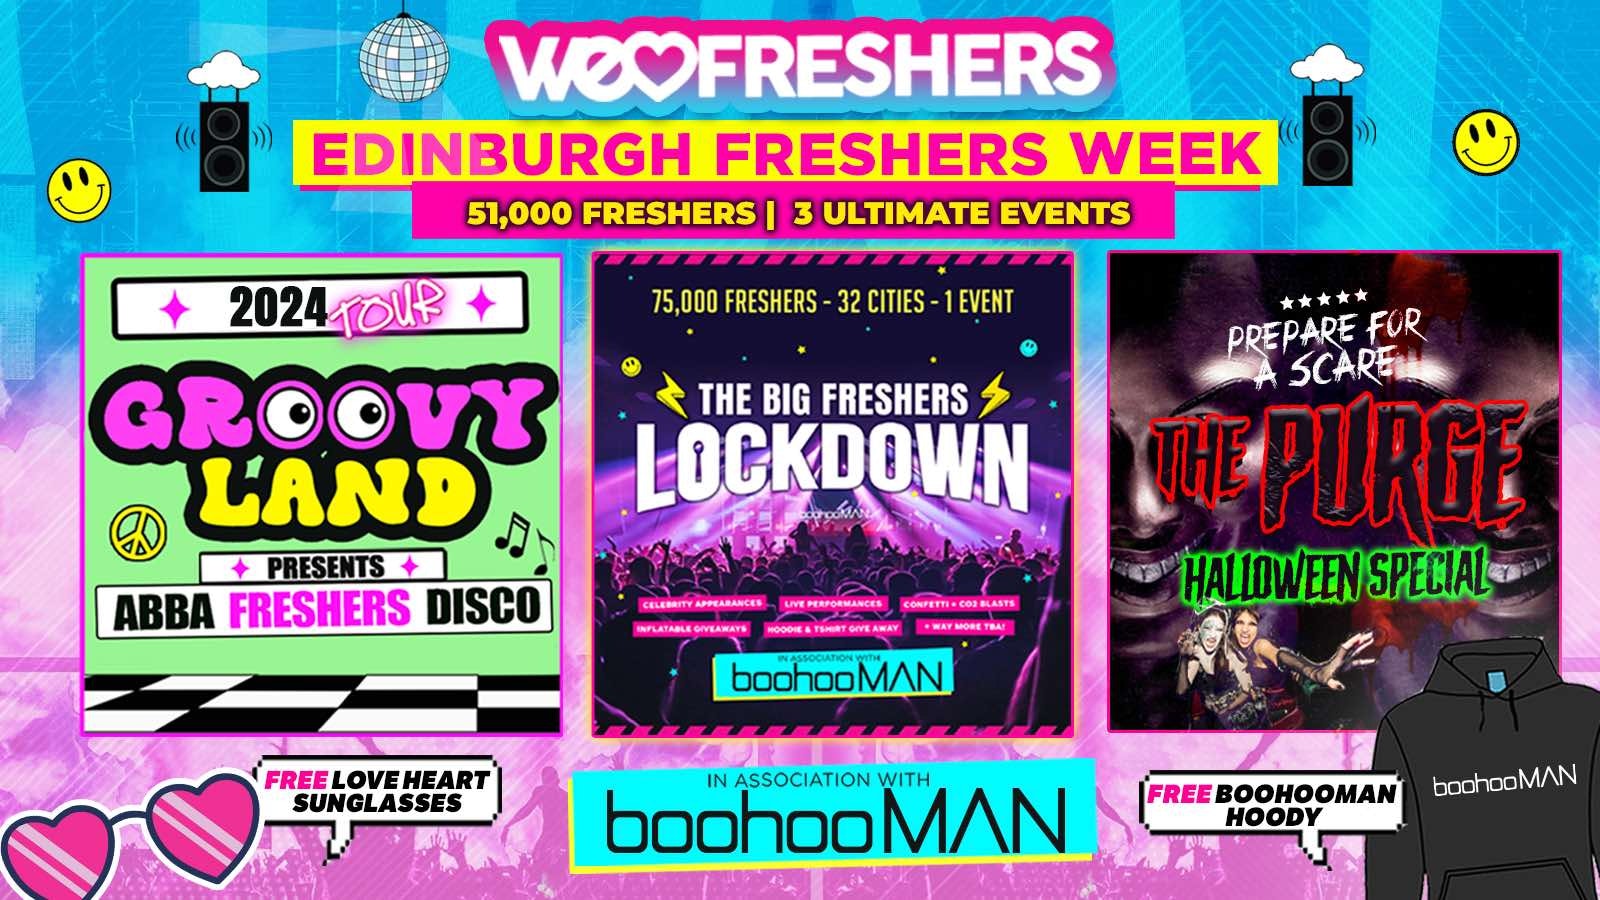 WE LOVE EDINBURGH FRESHERS 2024 in association with boohooMAN -3 EVENTS❗